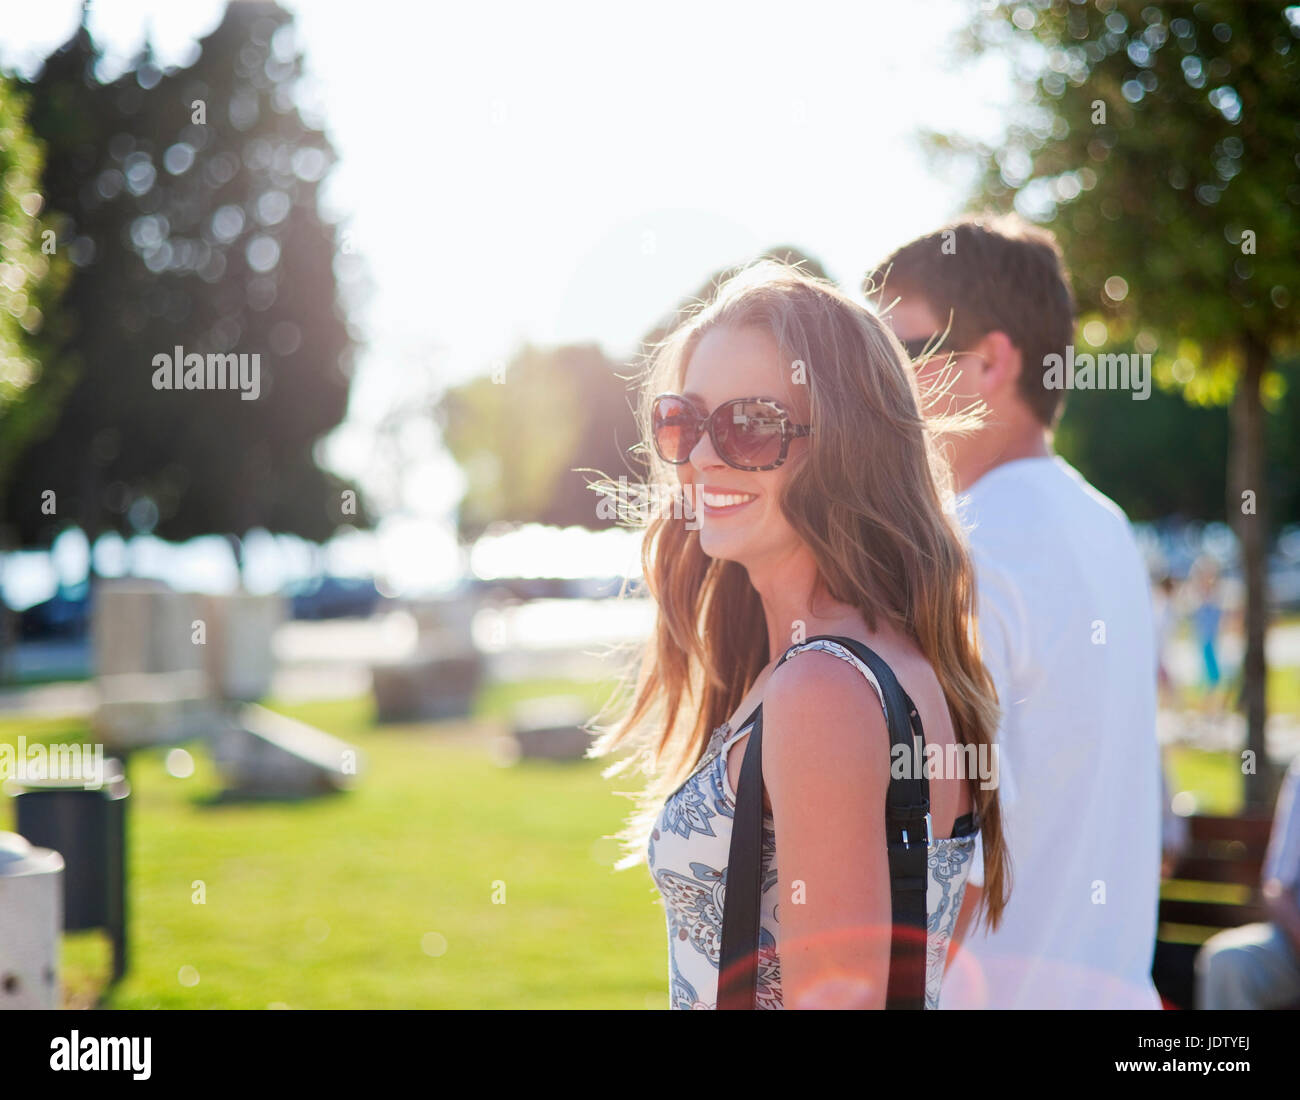 Smiling woman walking with boyfriend Banque D'Images